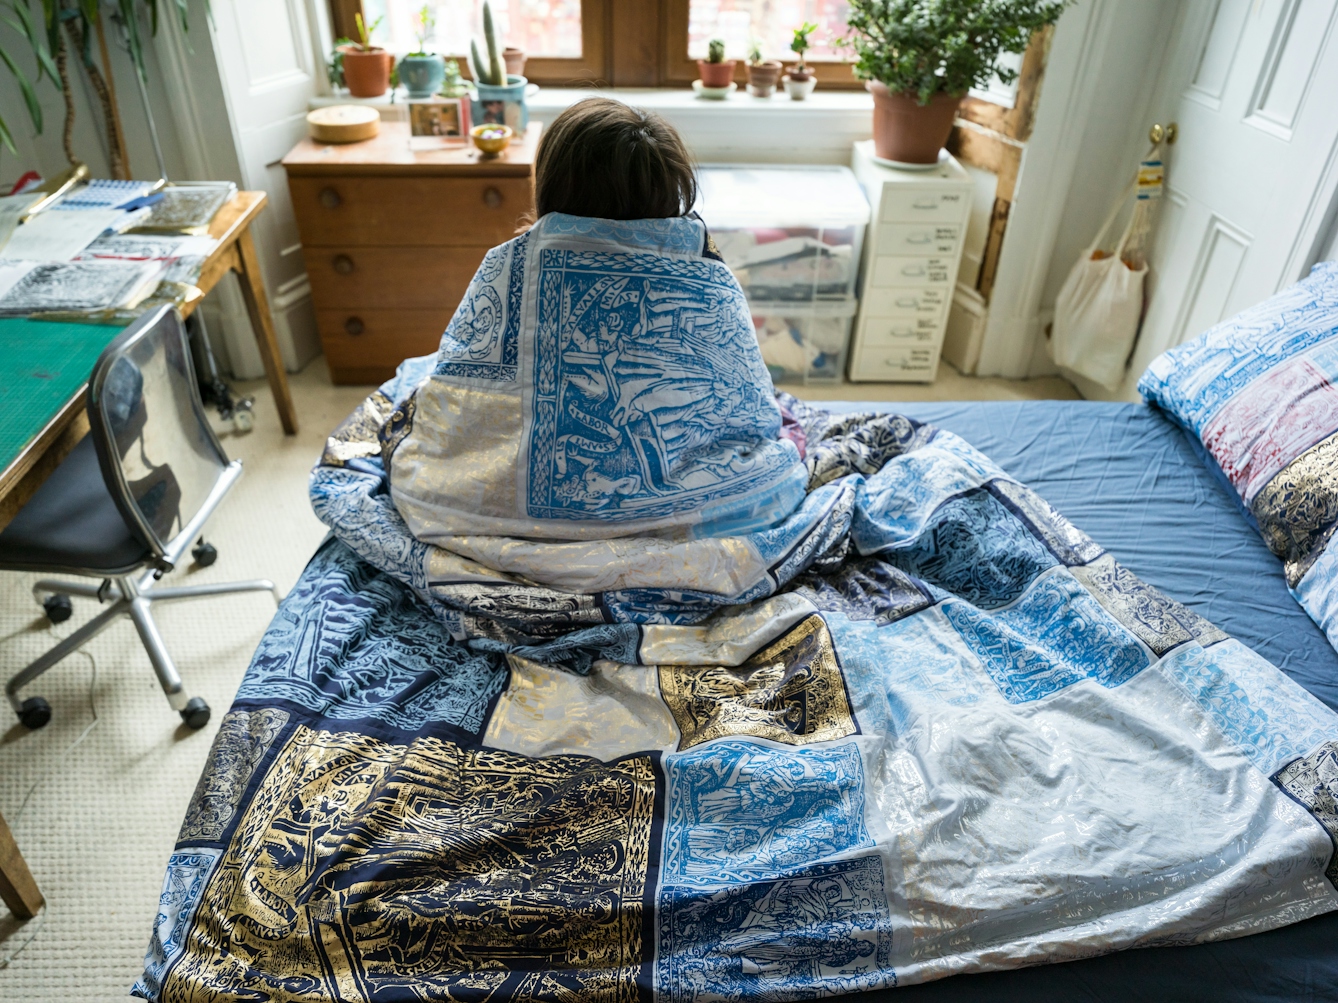 Photograph of a young woman sitting with her back to the camera on her bed, wrapped in a duvet cover made of a patchwork of blue, red, silver and gold screen-printed designs. She is looking towards large windows, a chest of drawers, a pot plant and the corner of a desk.